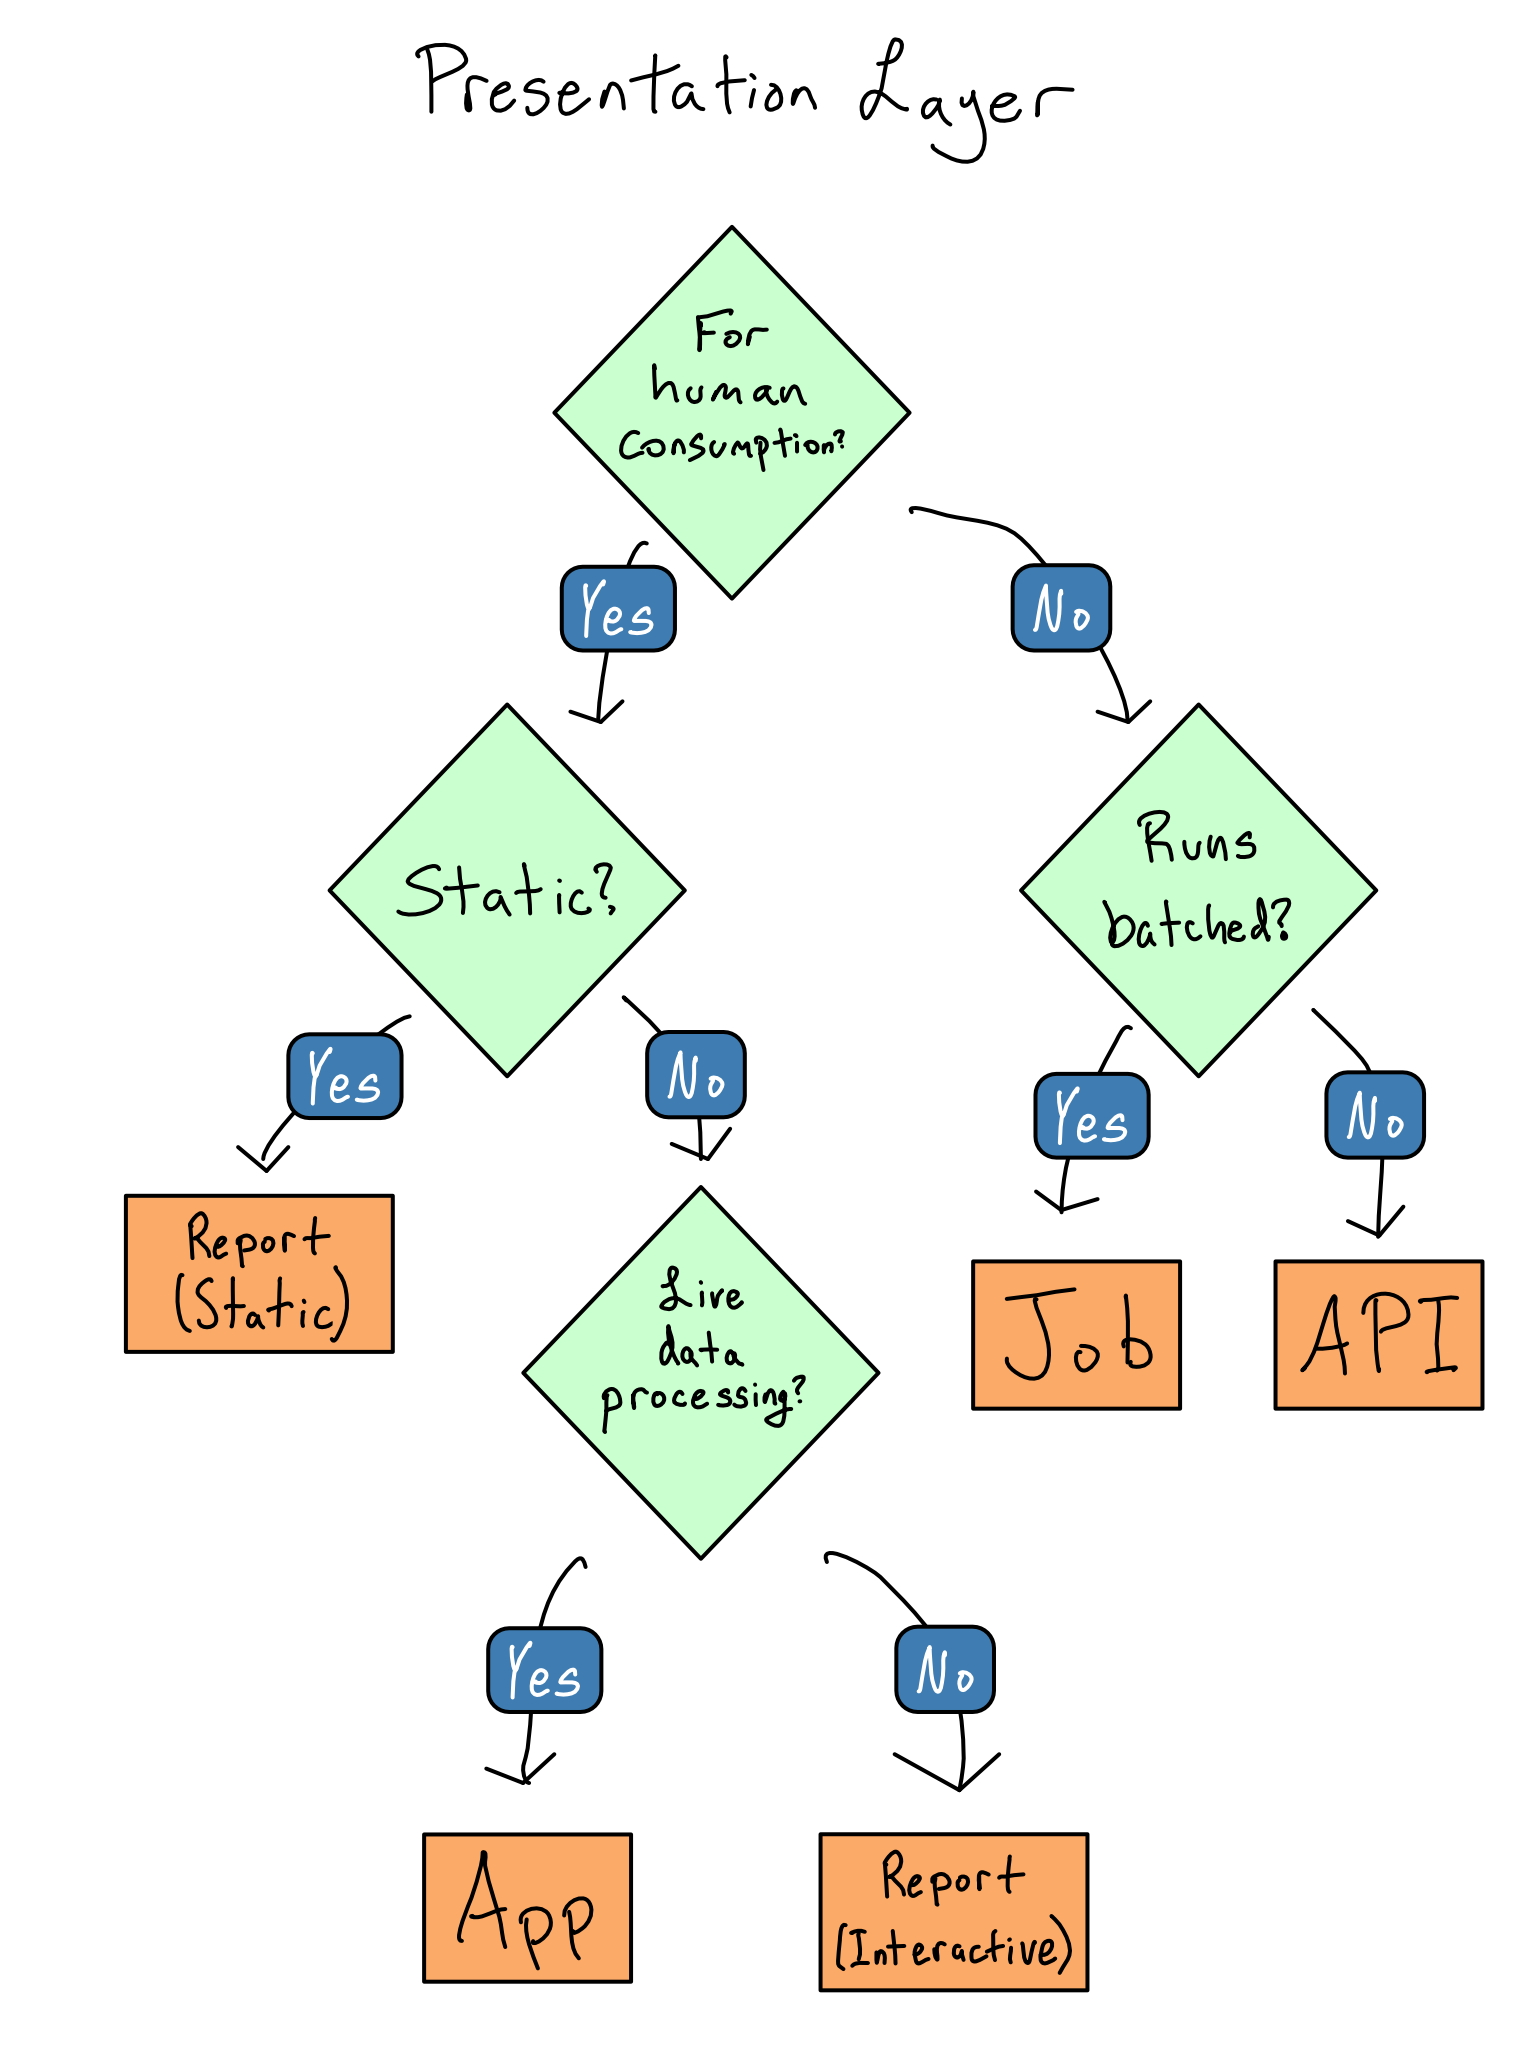 A flow chart of choosing an App, Report, API, or Job for the presentation layer as described in this chapter.